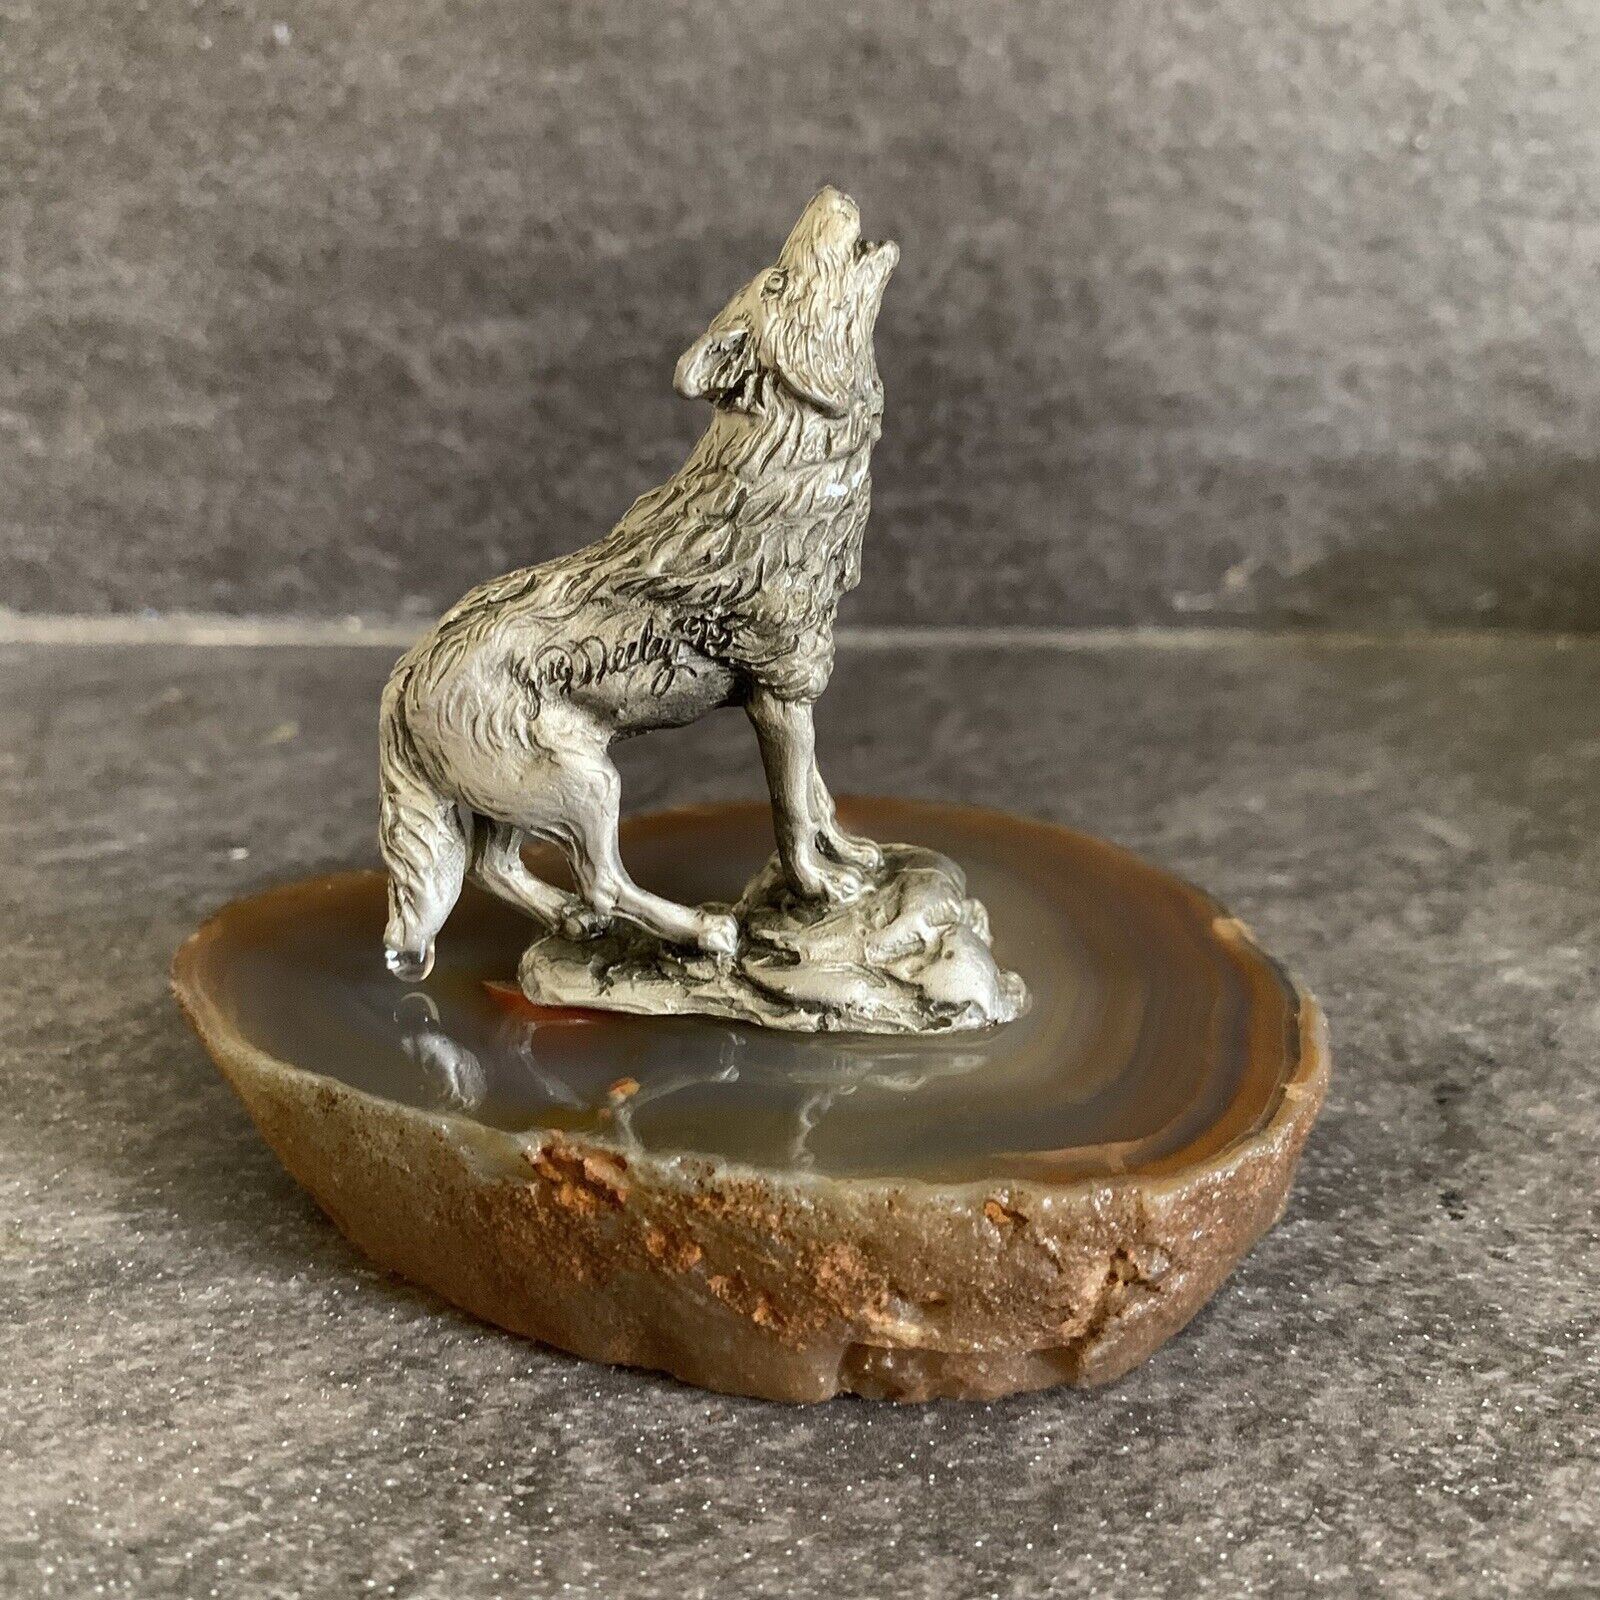 Greg Neeley 95’ Pewter Howling Wolf Statue Sculpture Figurine On Real Agate Rock